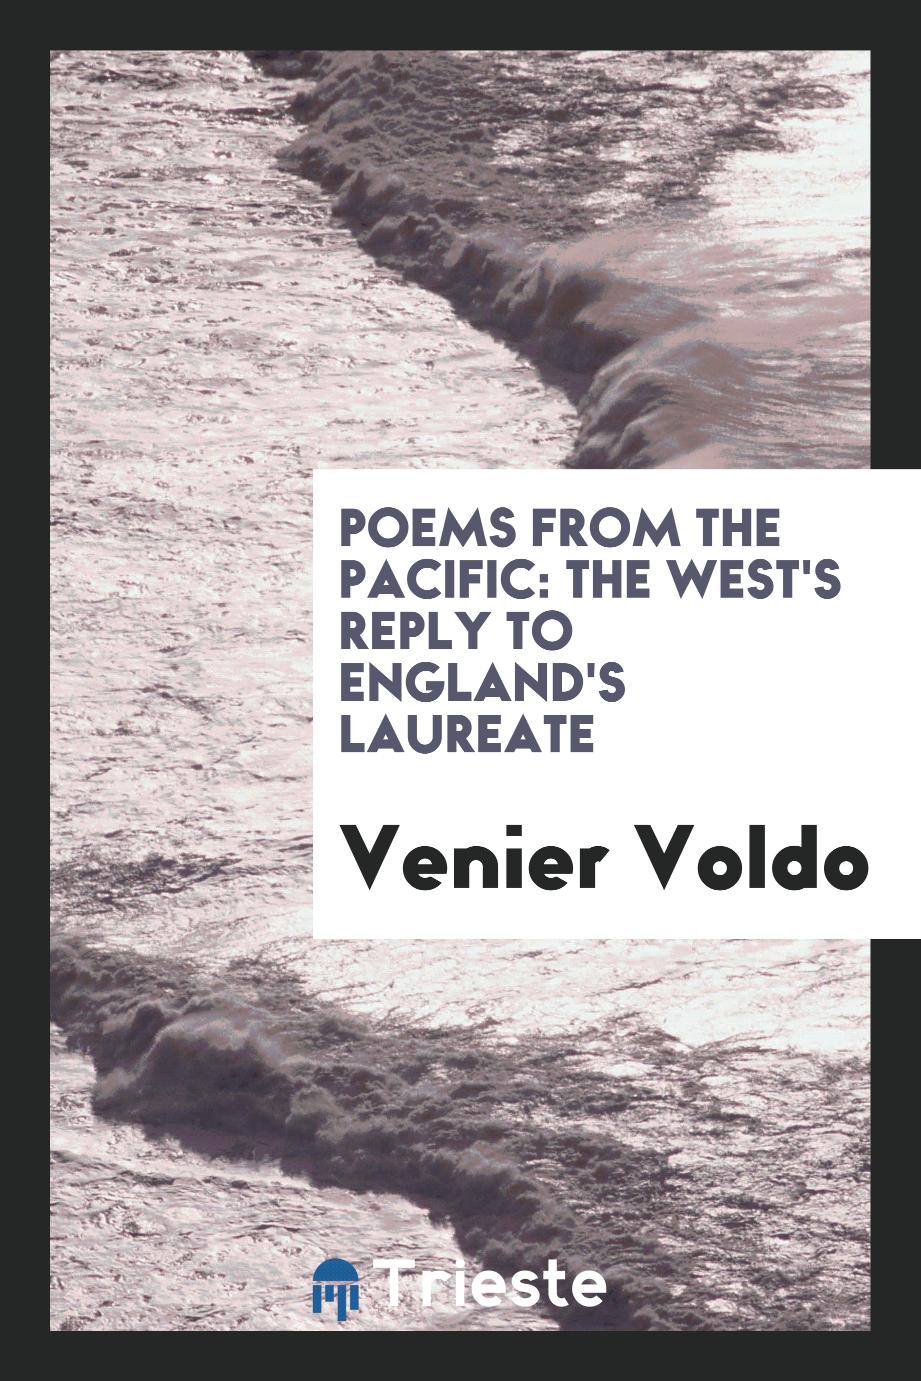 Poems from the Pacific: The West's Reply to England's Laureate